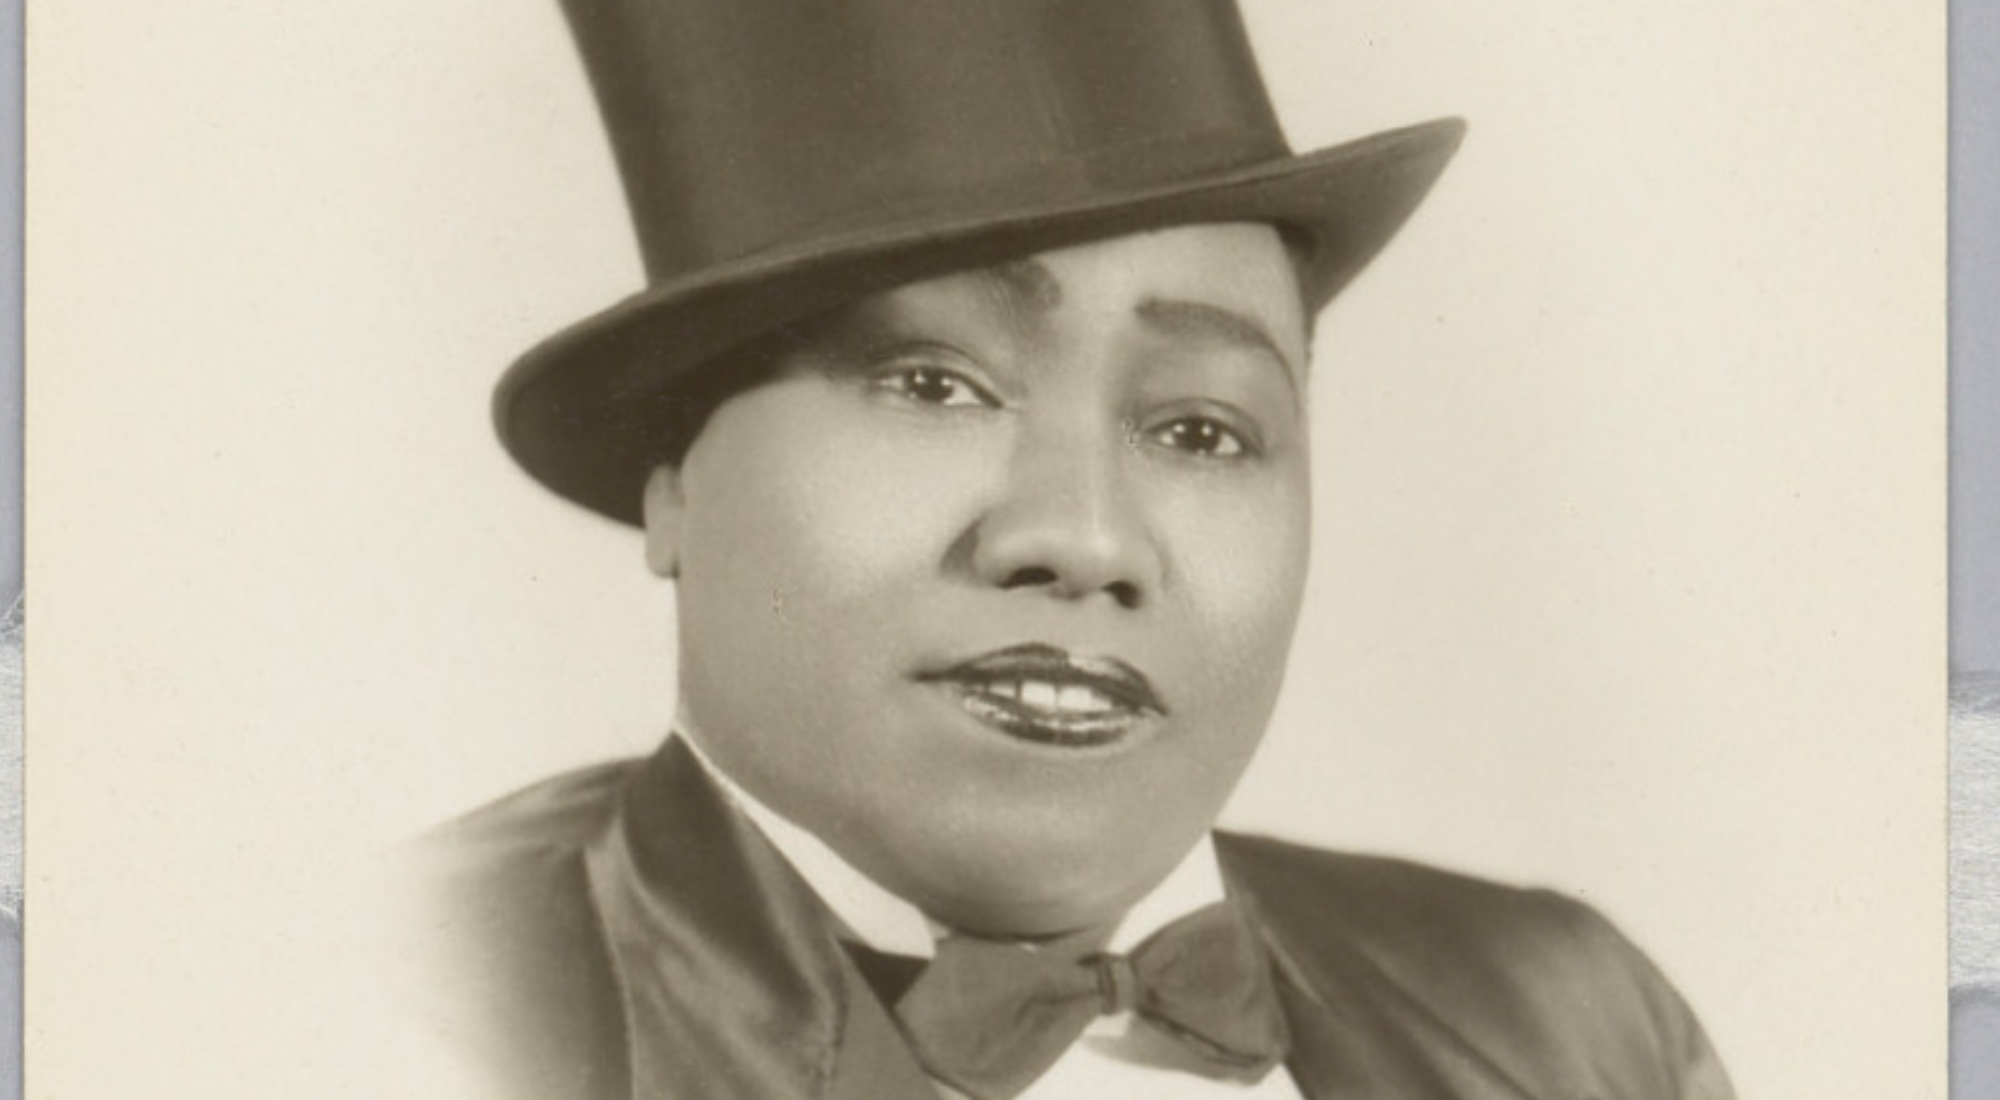 an old black and white photo of a person in a top hat